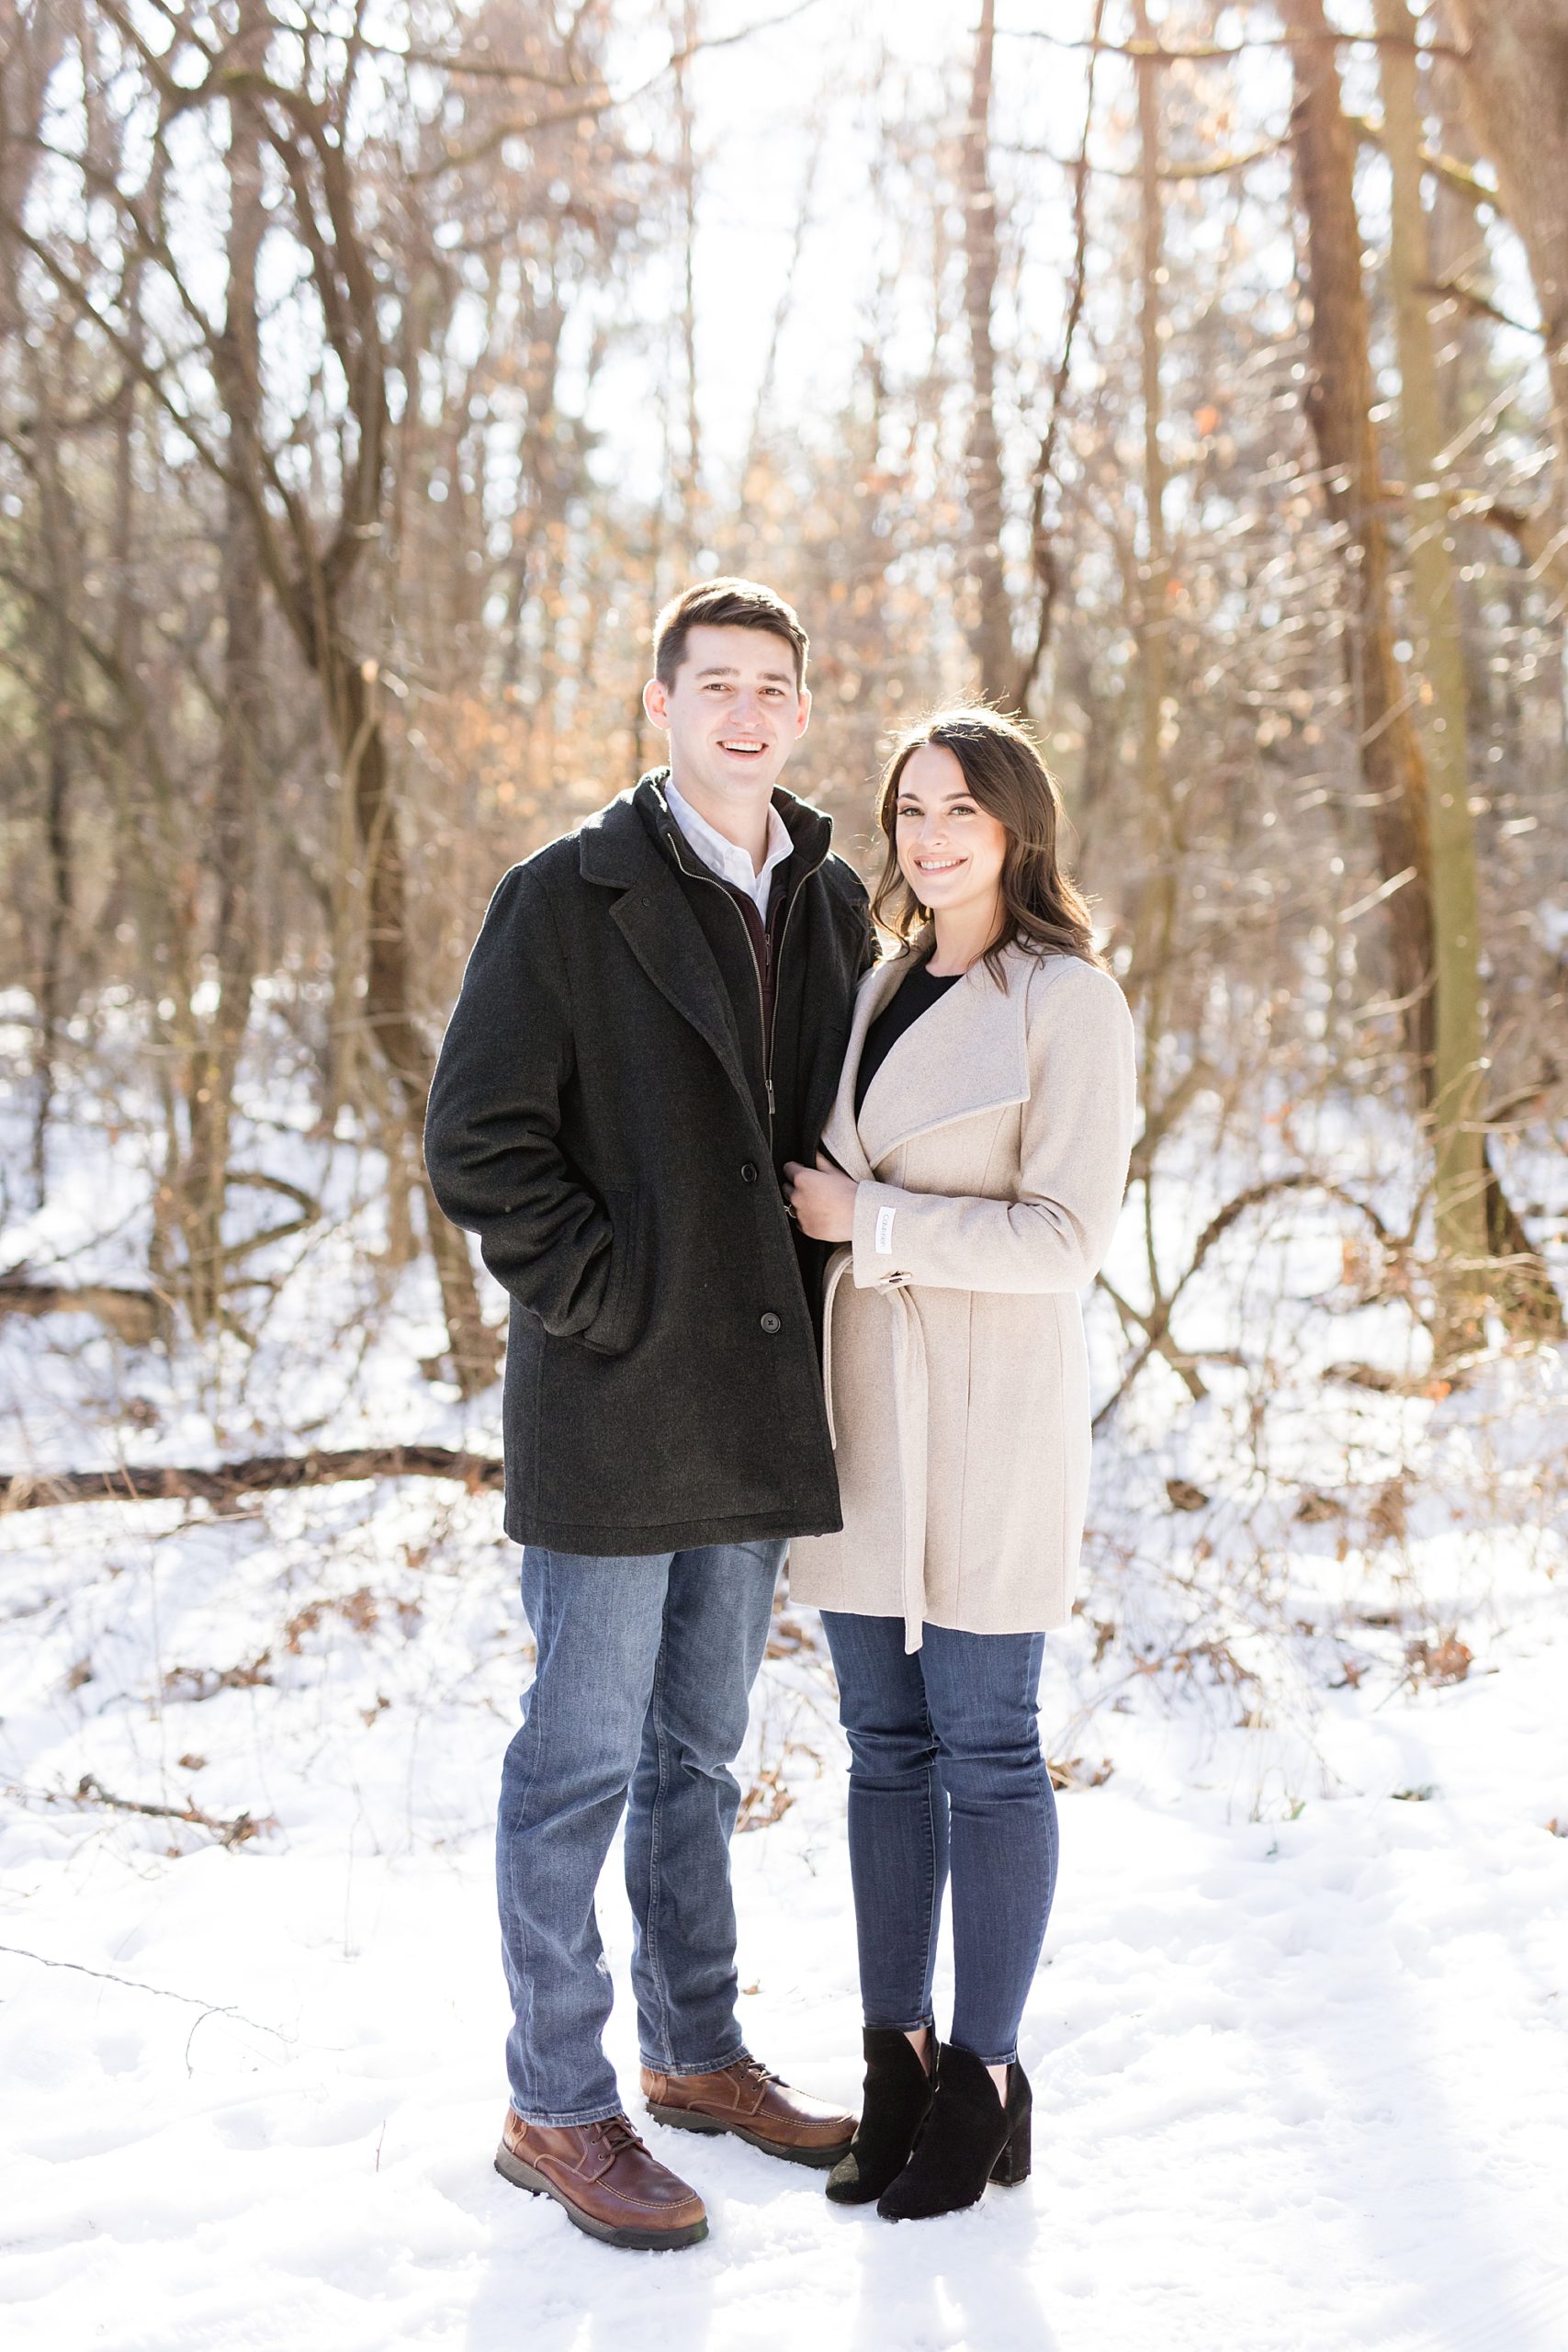 A snowy winter engagement at Stony Creek by Breanne Rochelle Photography.